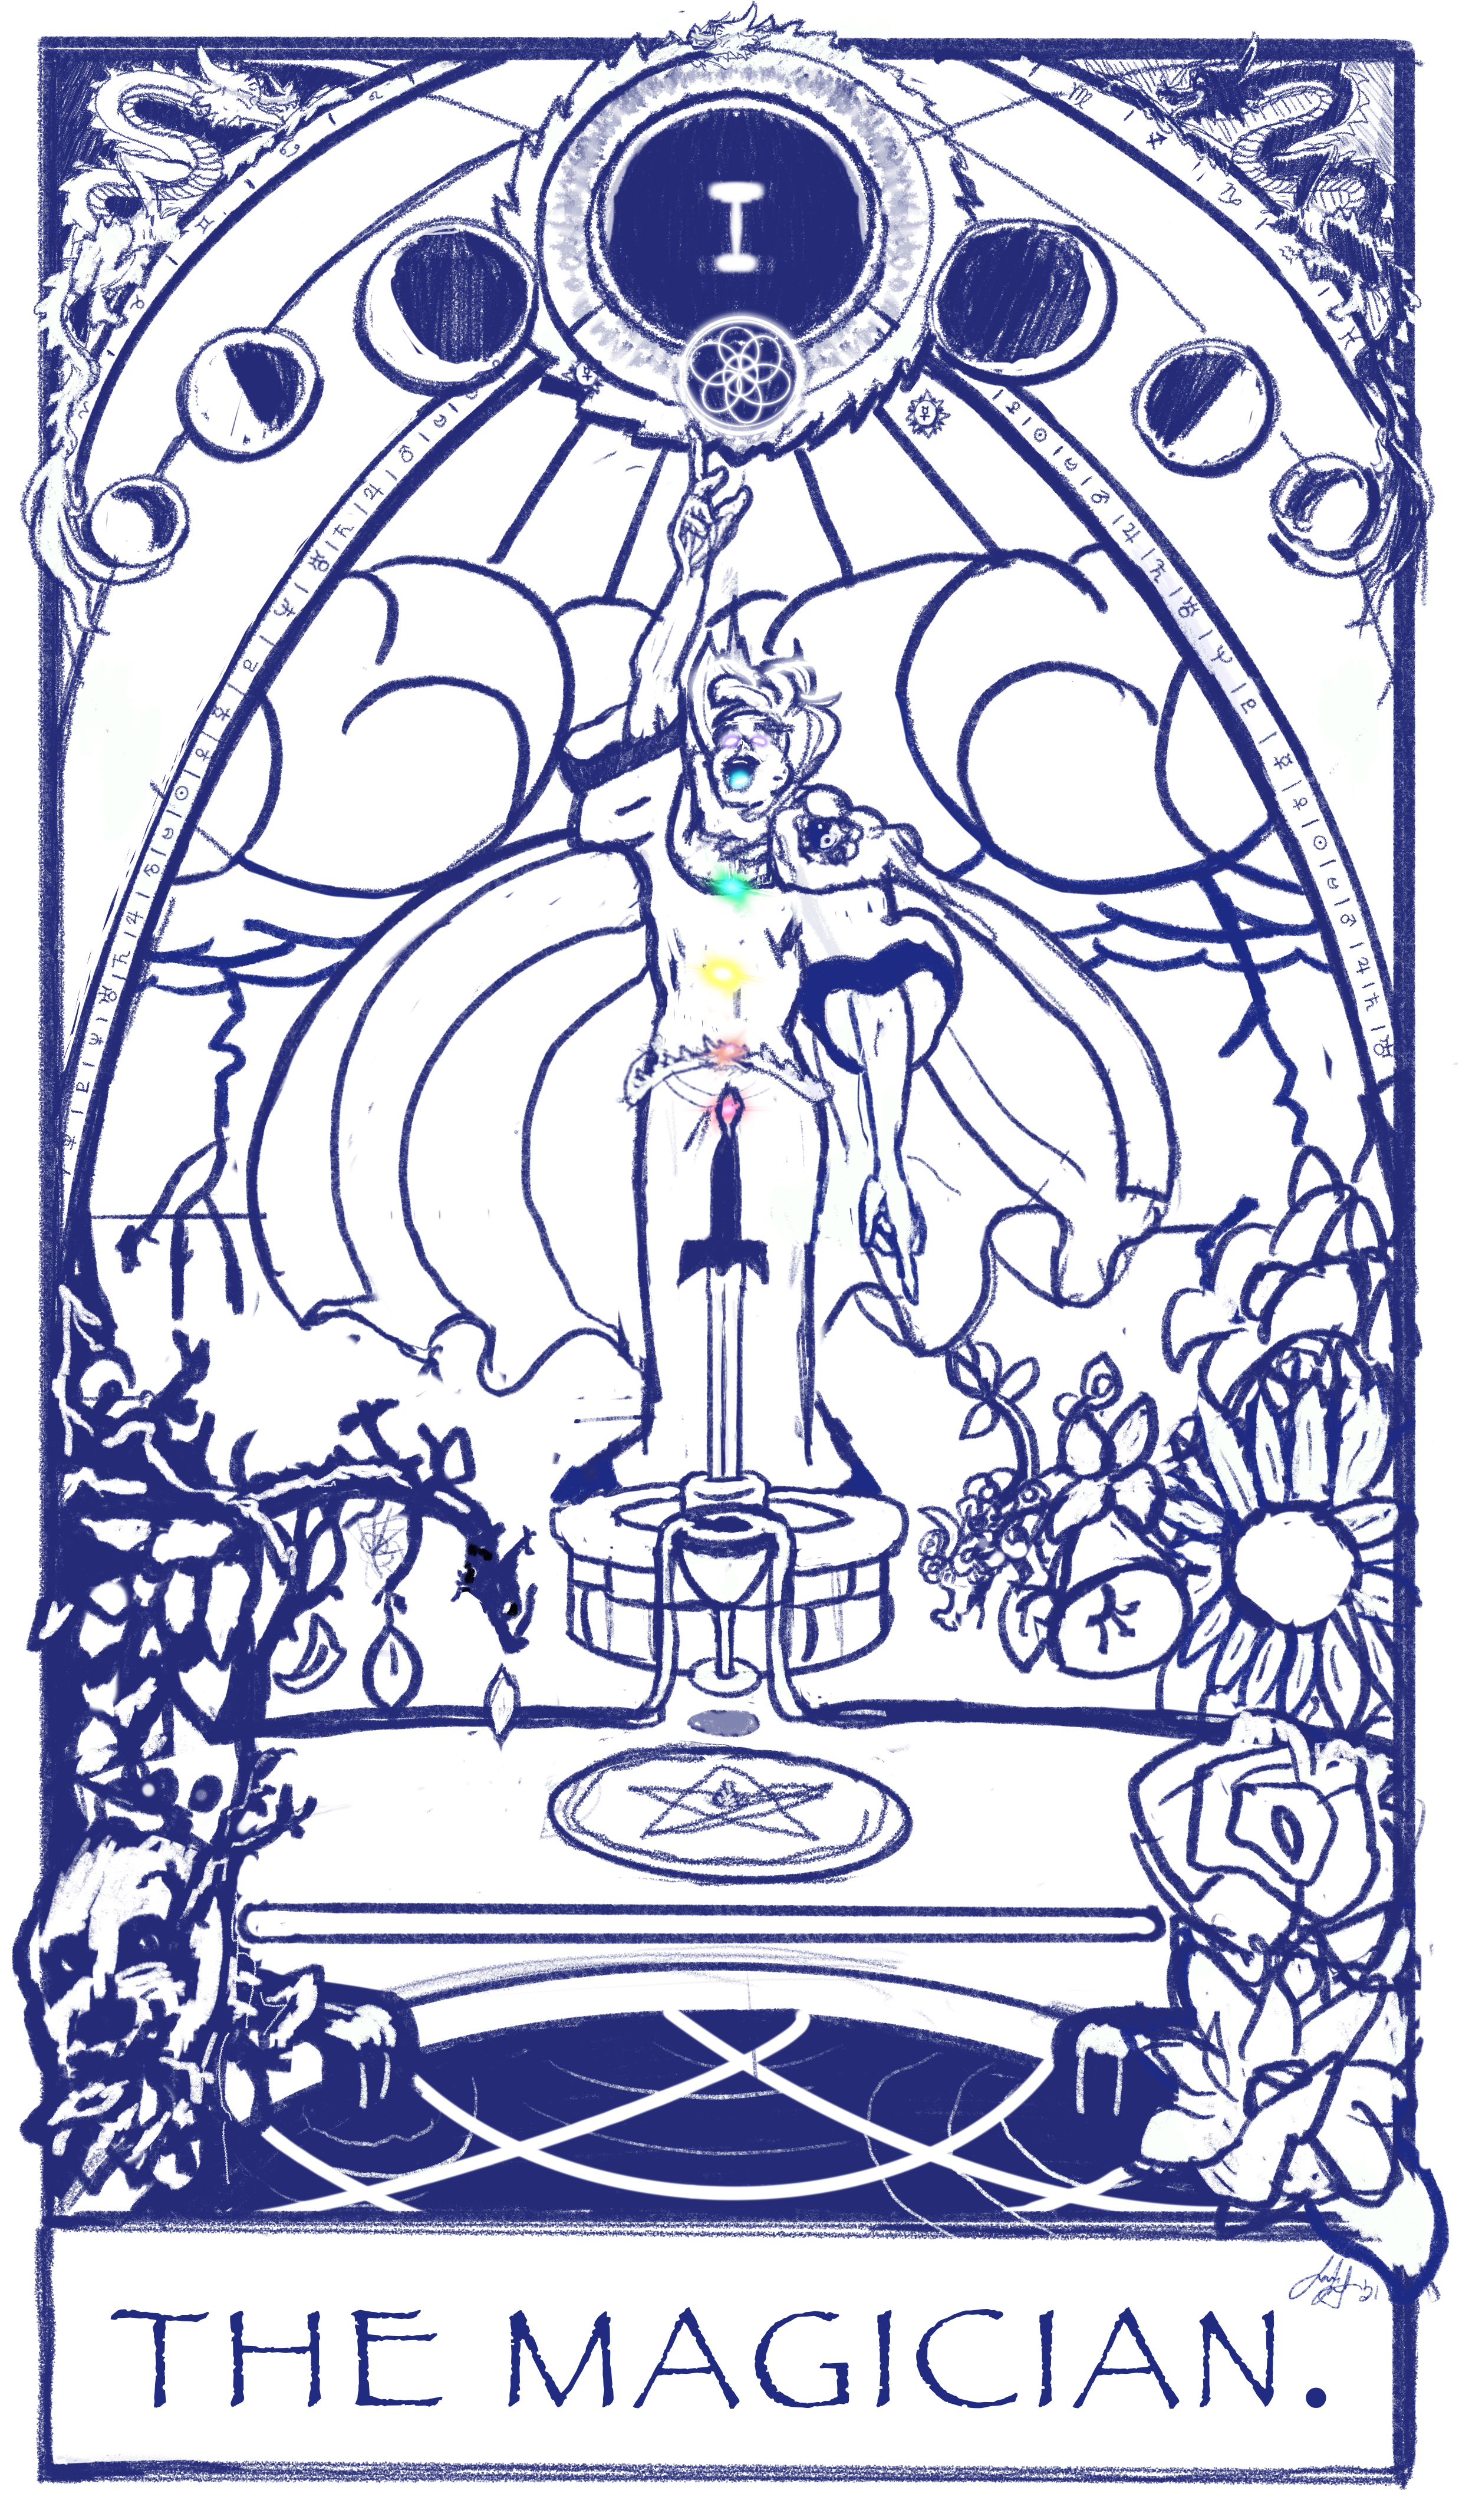 Concept Art for a Tarot Deck, and still copyright thinktank, thanks, this is for the Magician card.